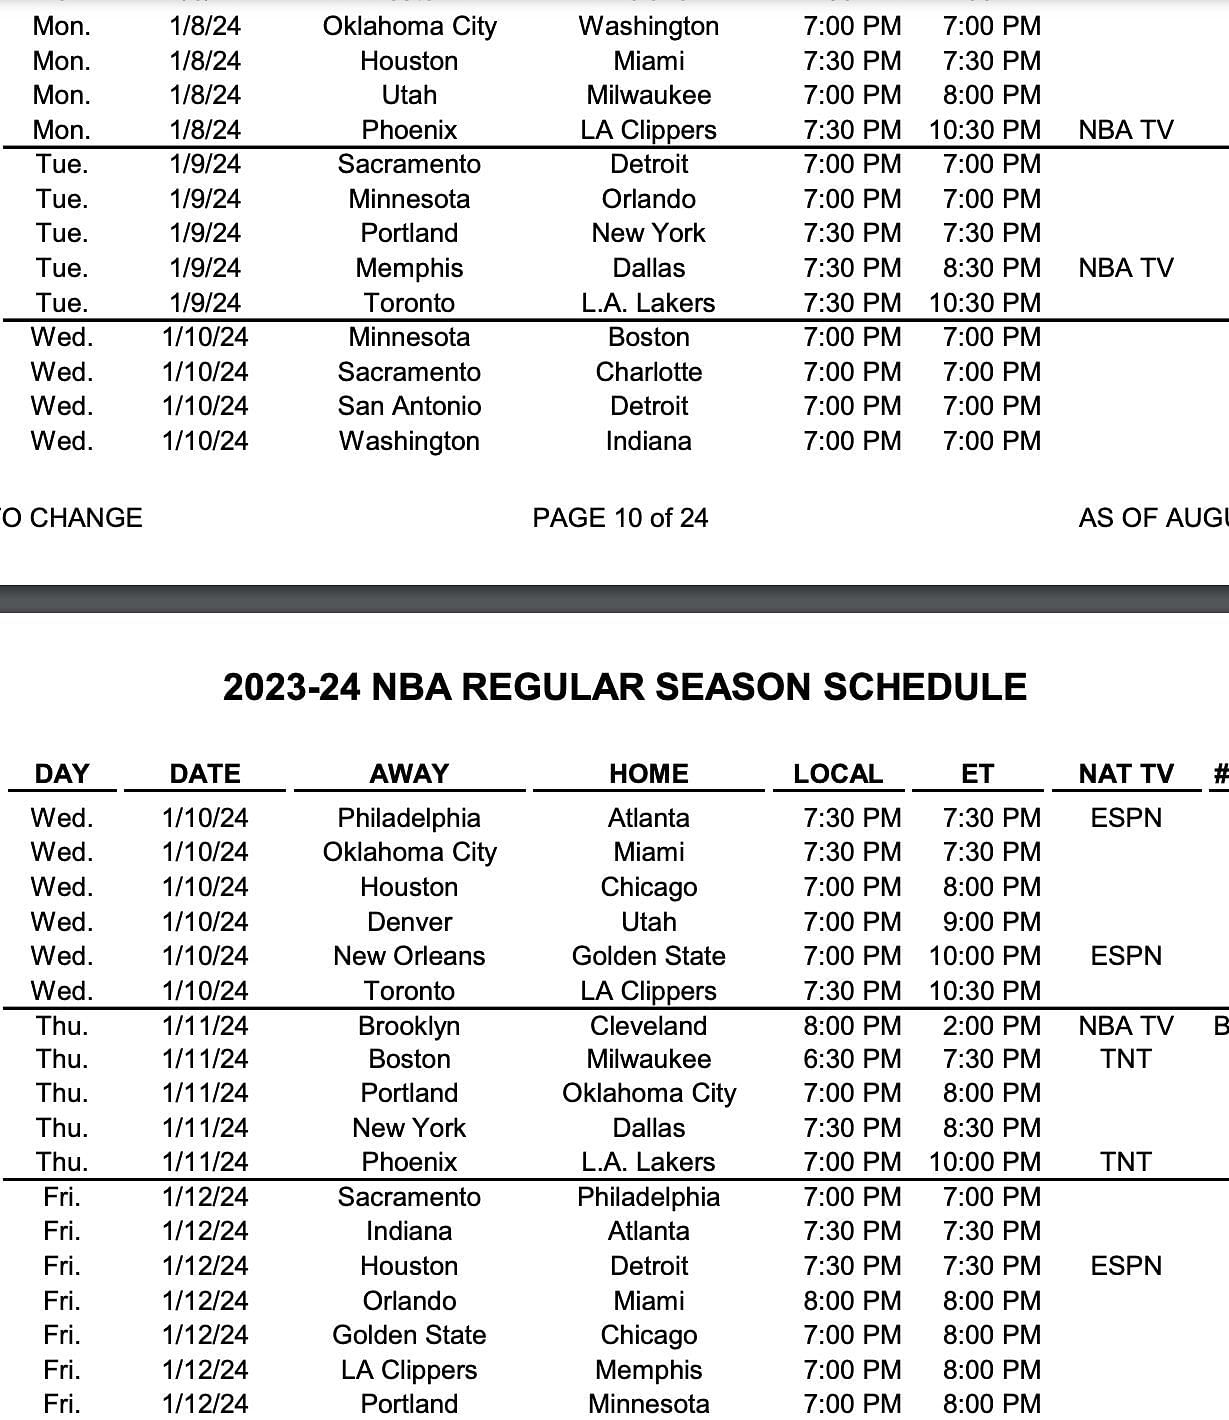 NBA Schedule 2023-24: What will the Christmas games be in 2023?